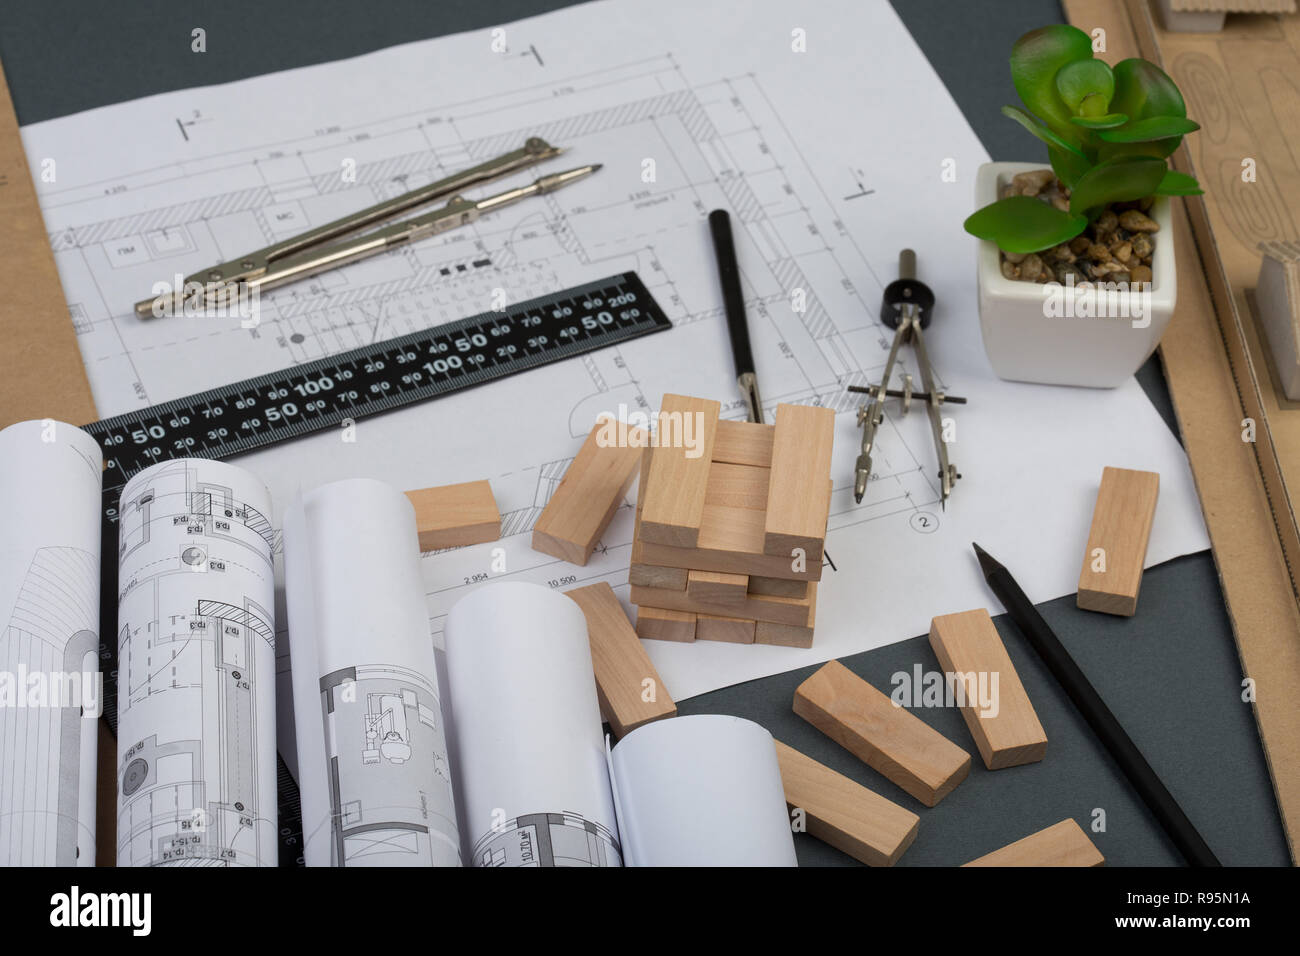 Workplace of architect - model house from wooden blocks, construction drawings, engineering tools on grey background Stock Photo